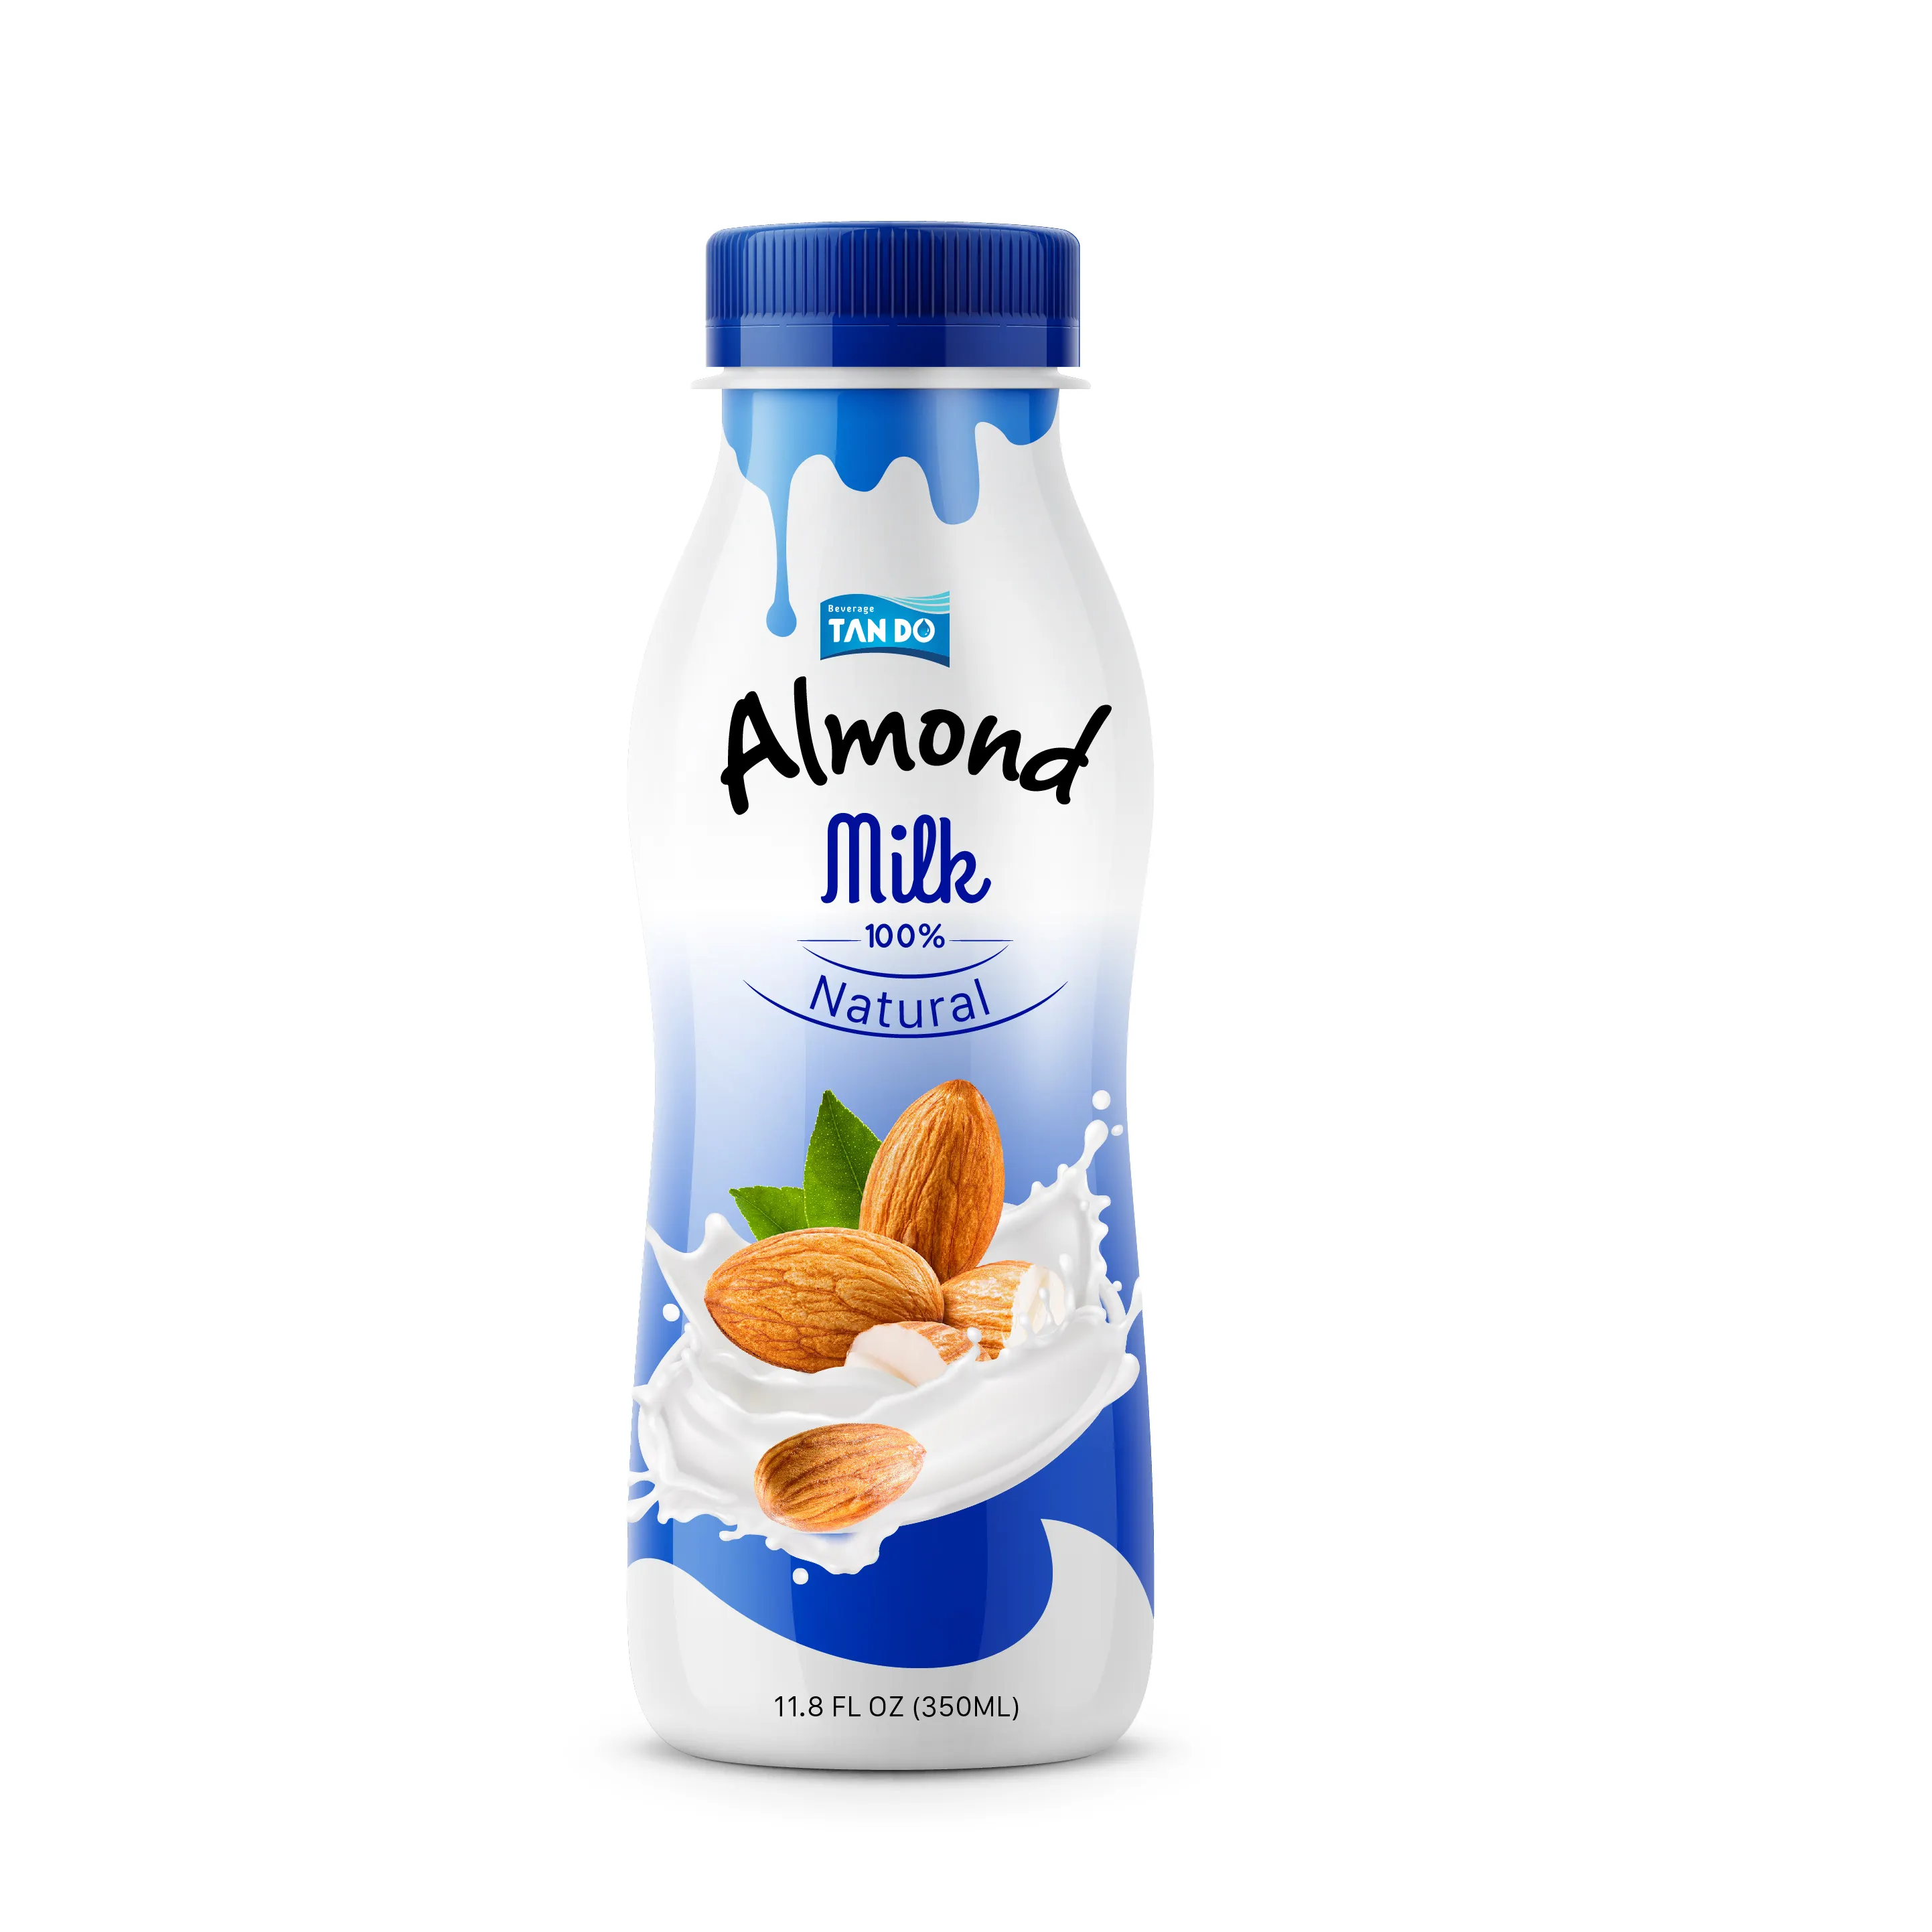 The best quality almond milk pack in PET bottle from Tan Do Beverage Company